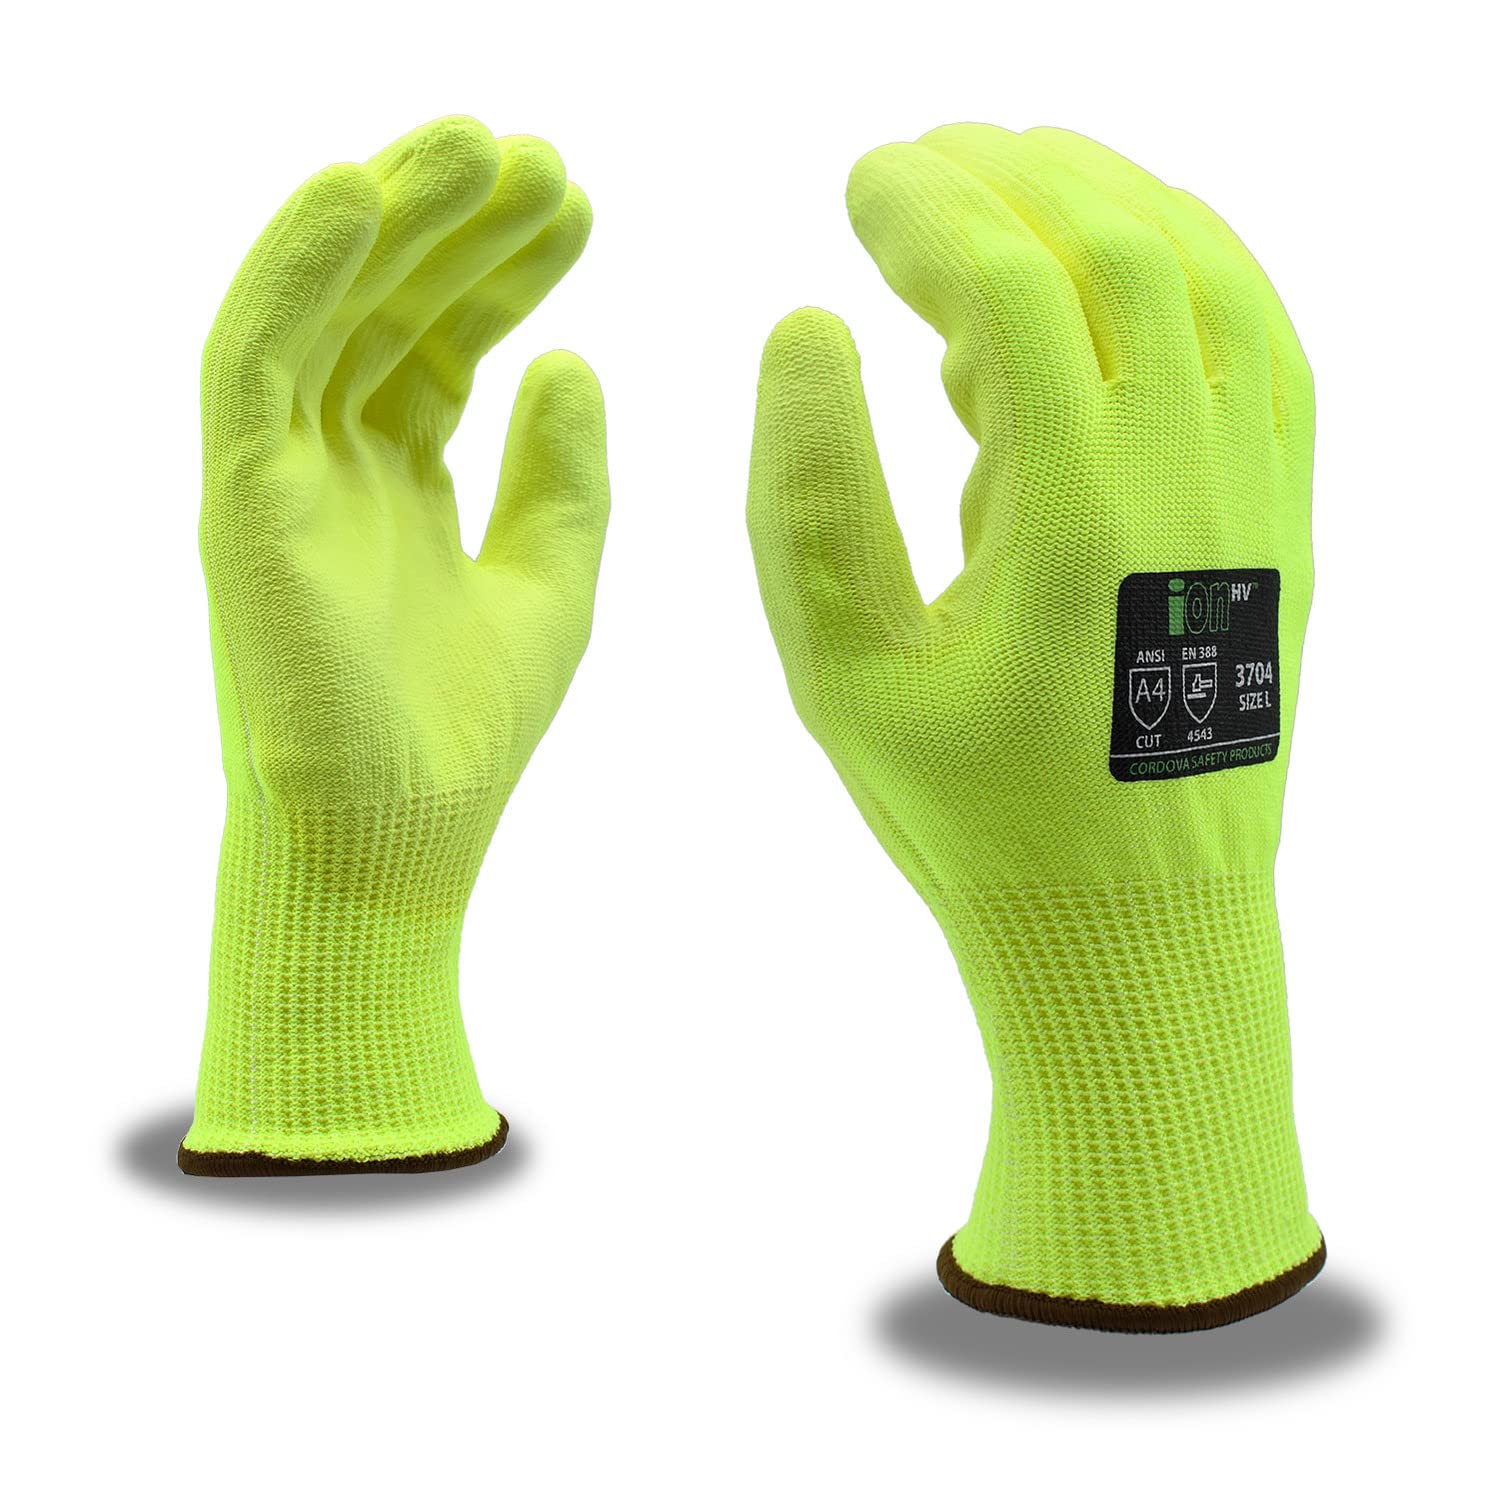 A pair of hi visibility safety gloves are shown